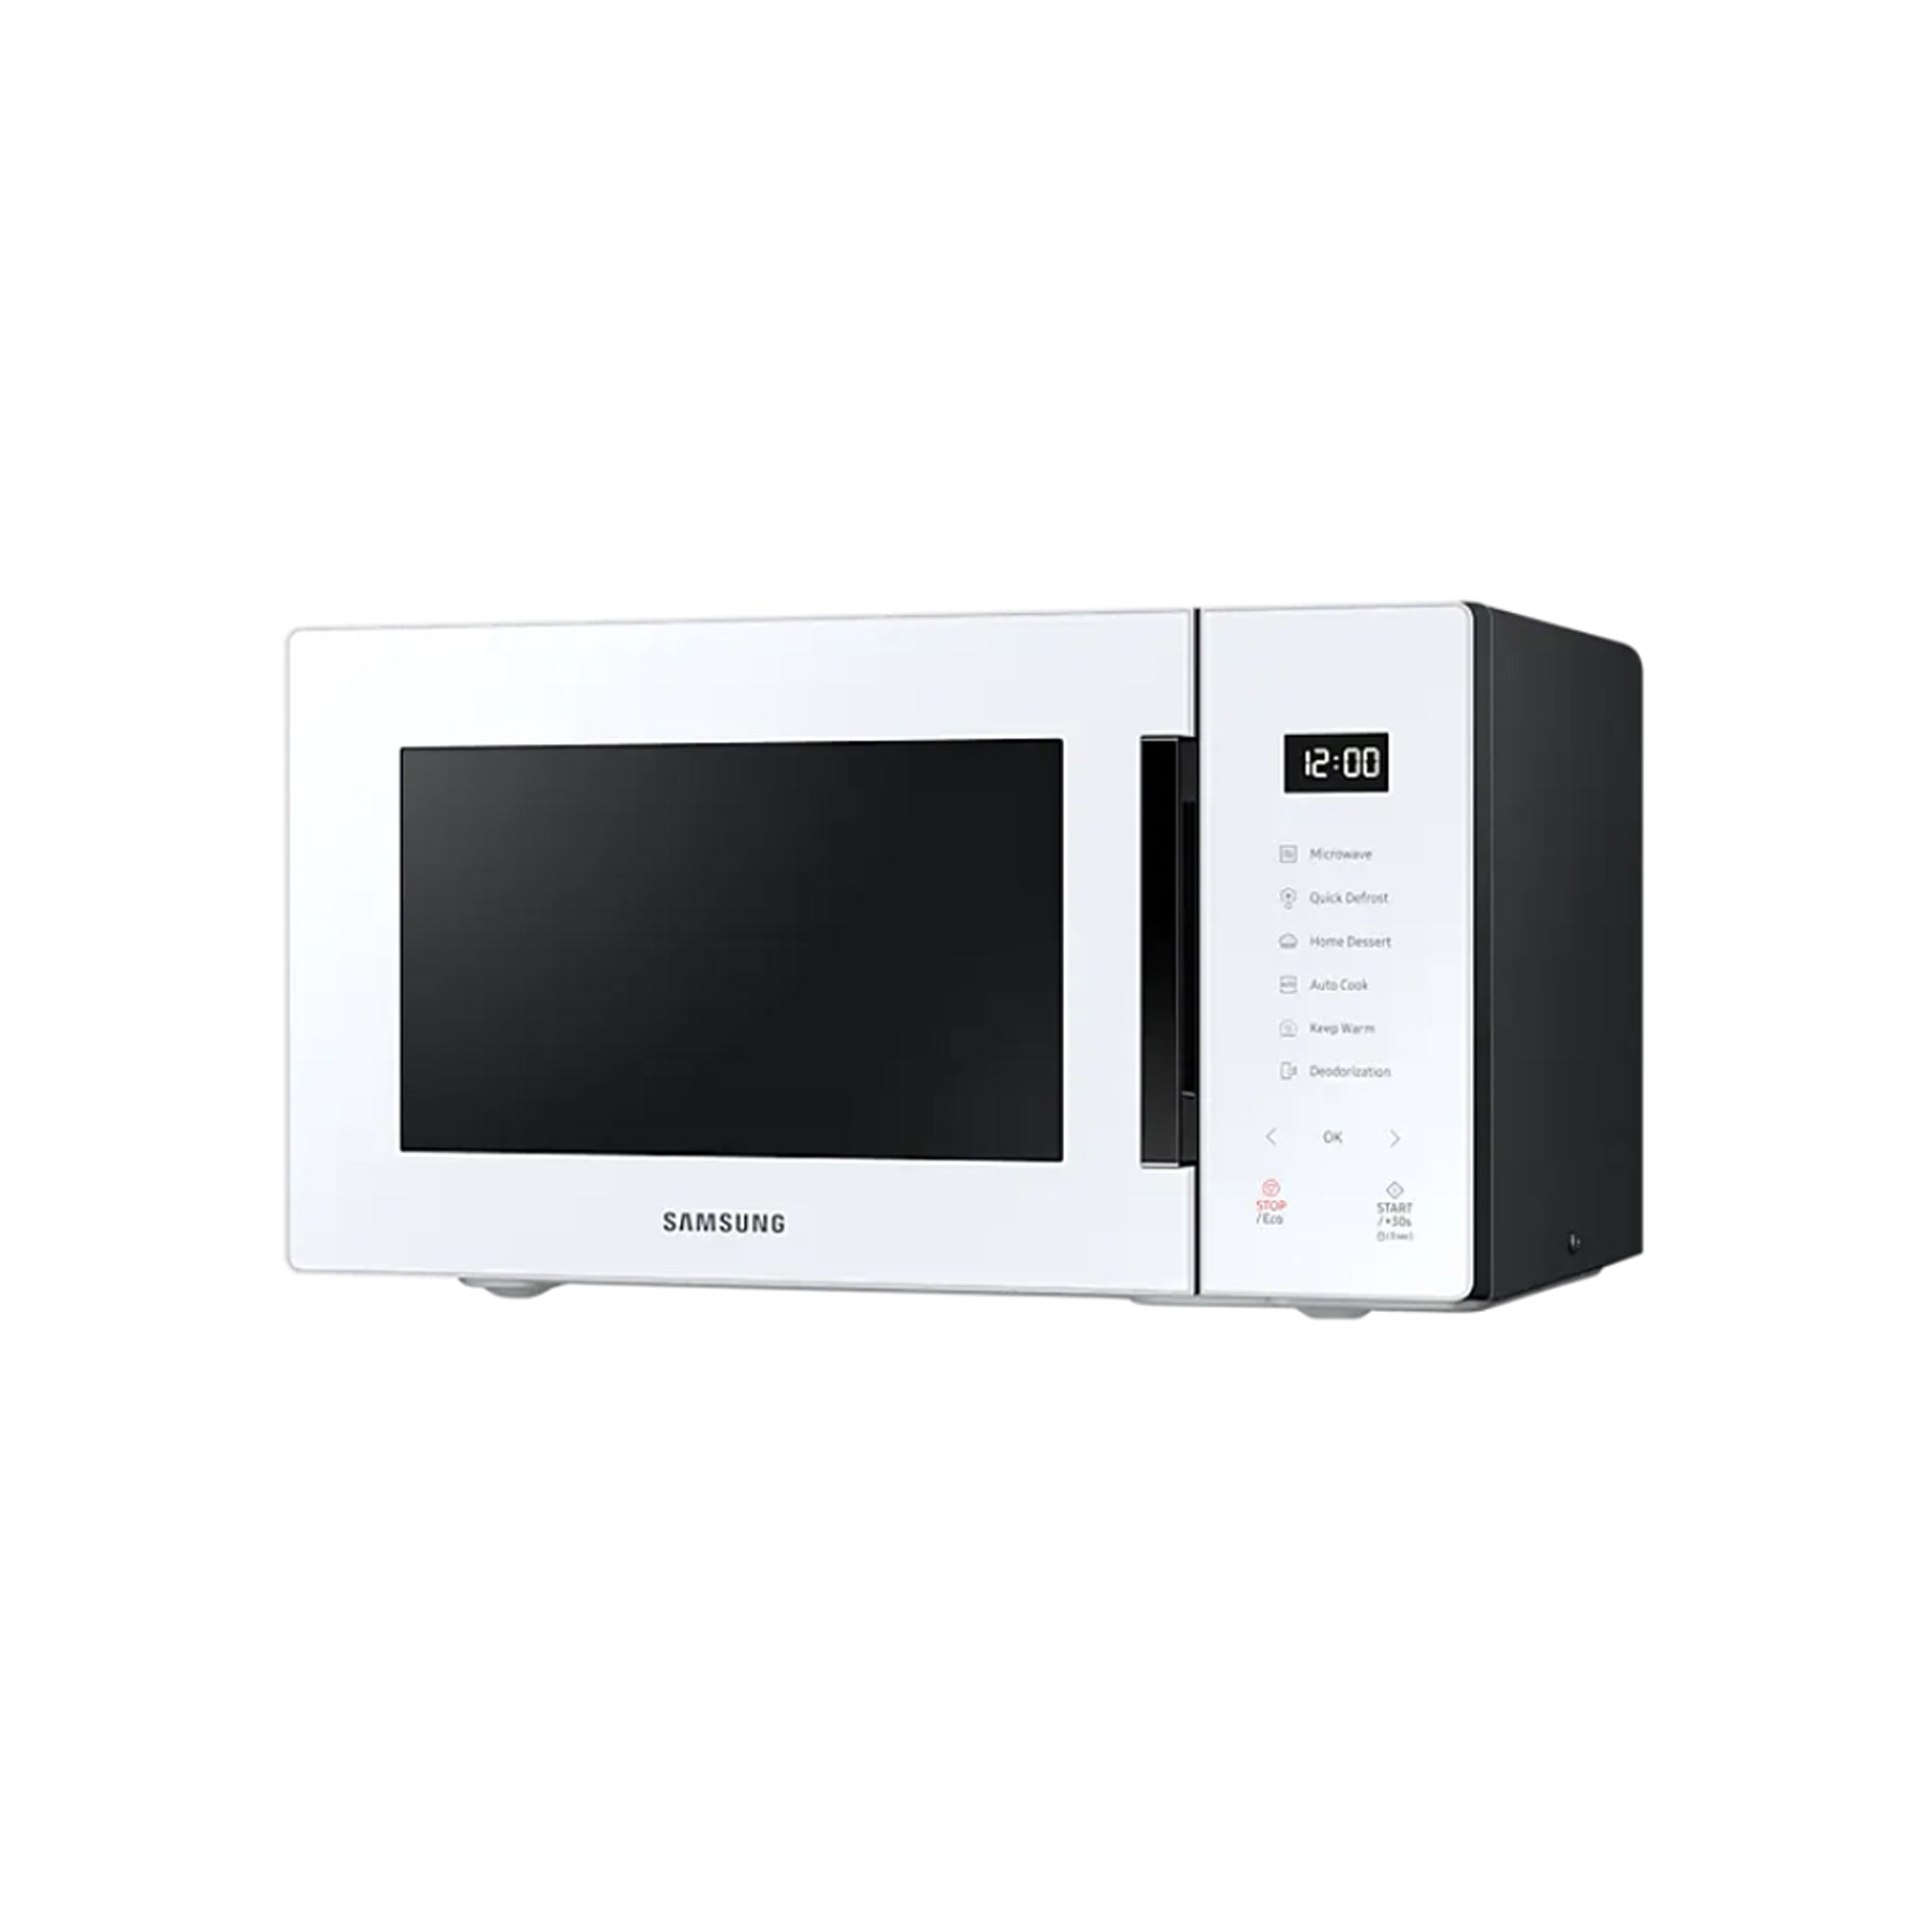 SAMSUNG 23L Bespoke MS23T5018AW/TC Microwave Oven Samsung